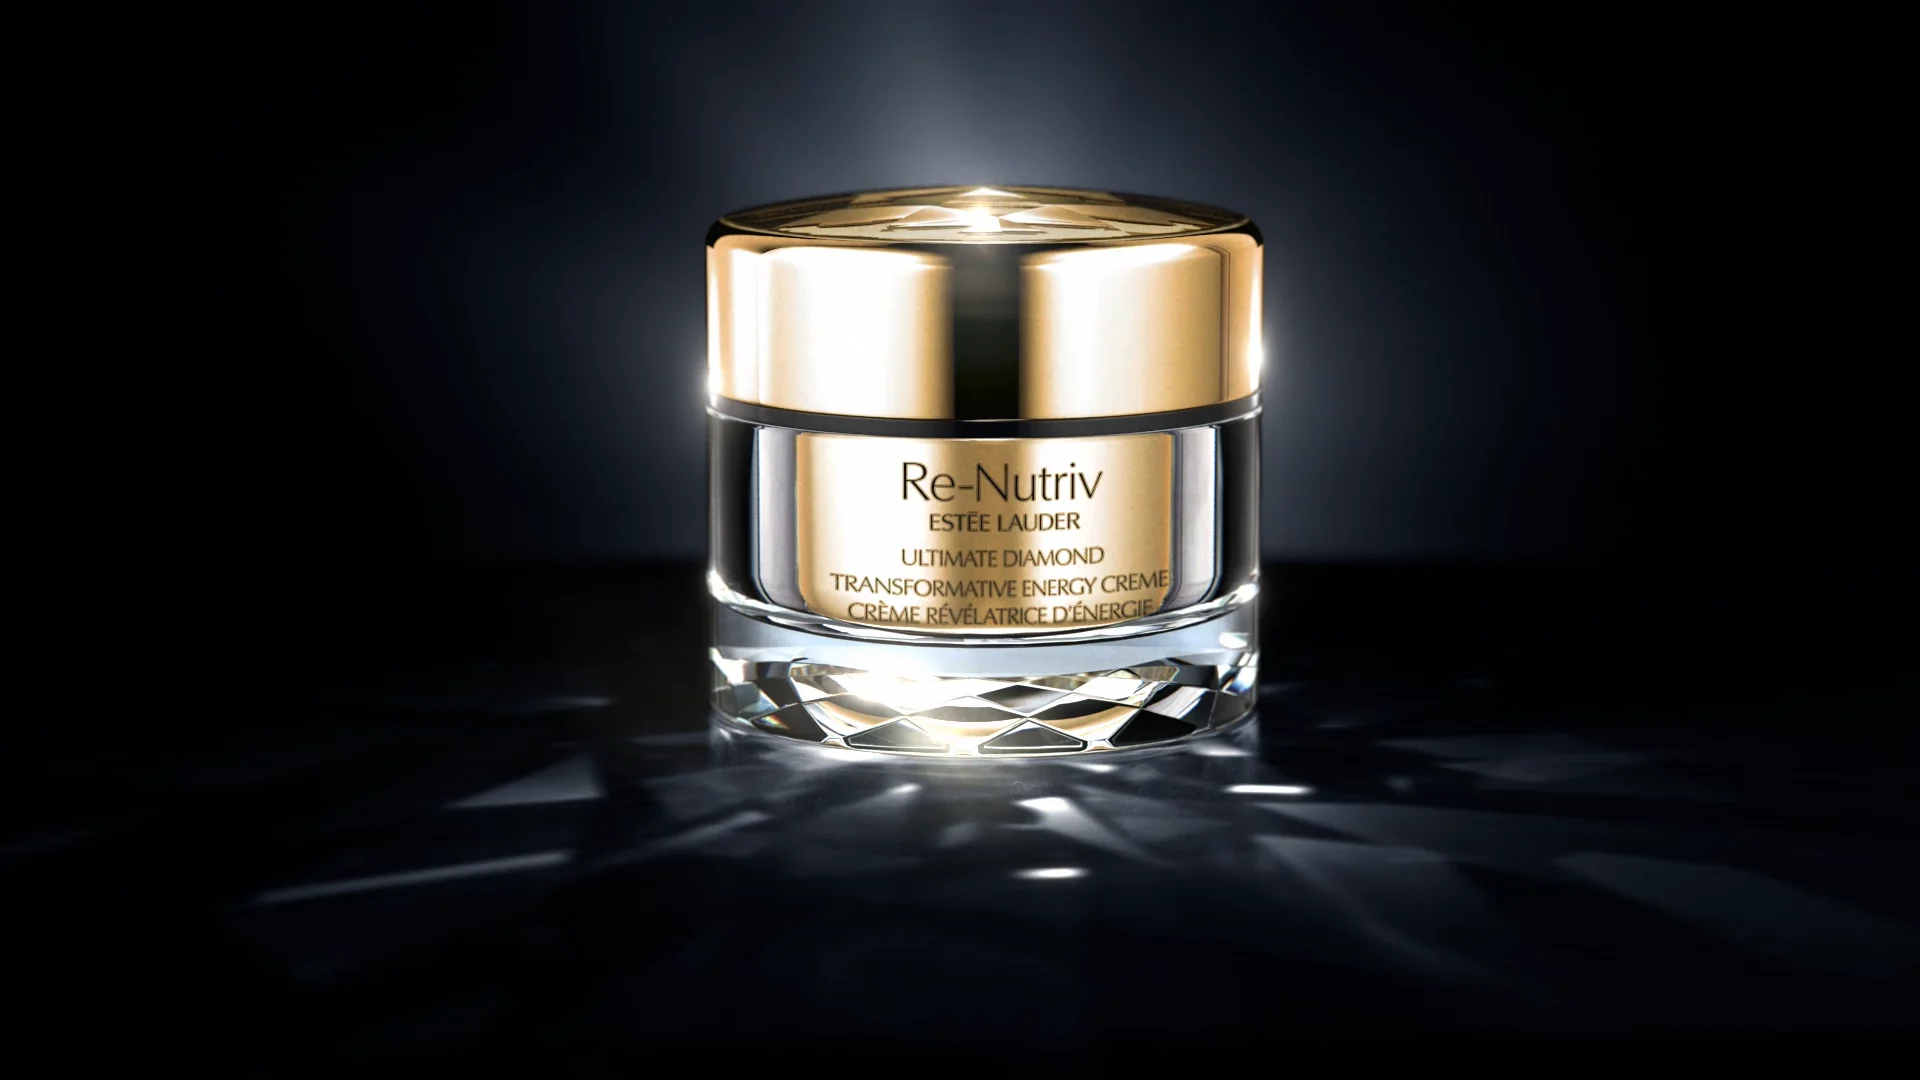 High class Estée Lauder Re-Nutriv packshot tin standing on a diamond reflecting surface. The pack itself has a diamond like bottom, a golden label and a golden top. Everything is shining and glowing due to several lenseflares